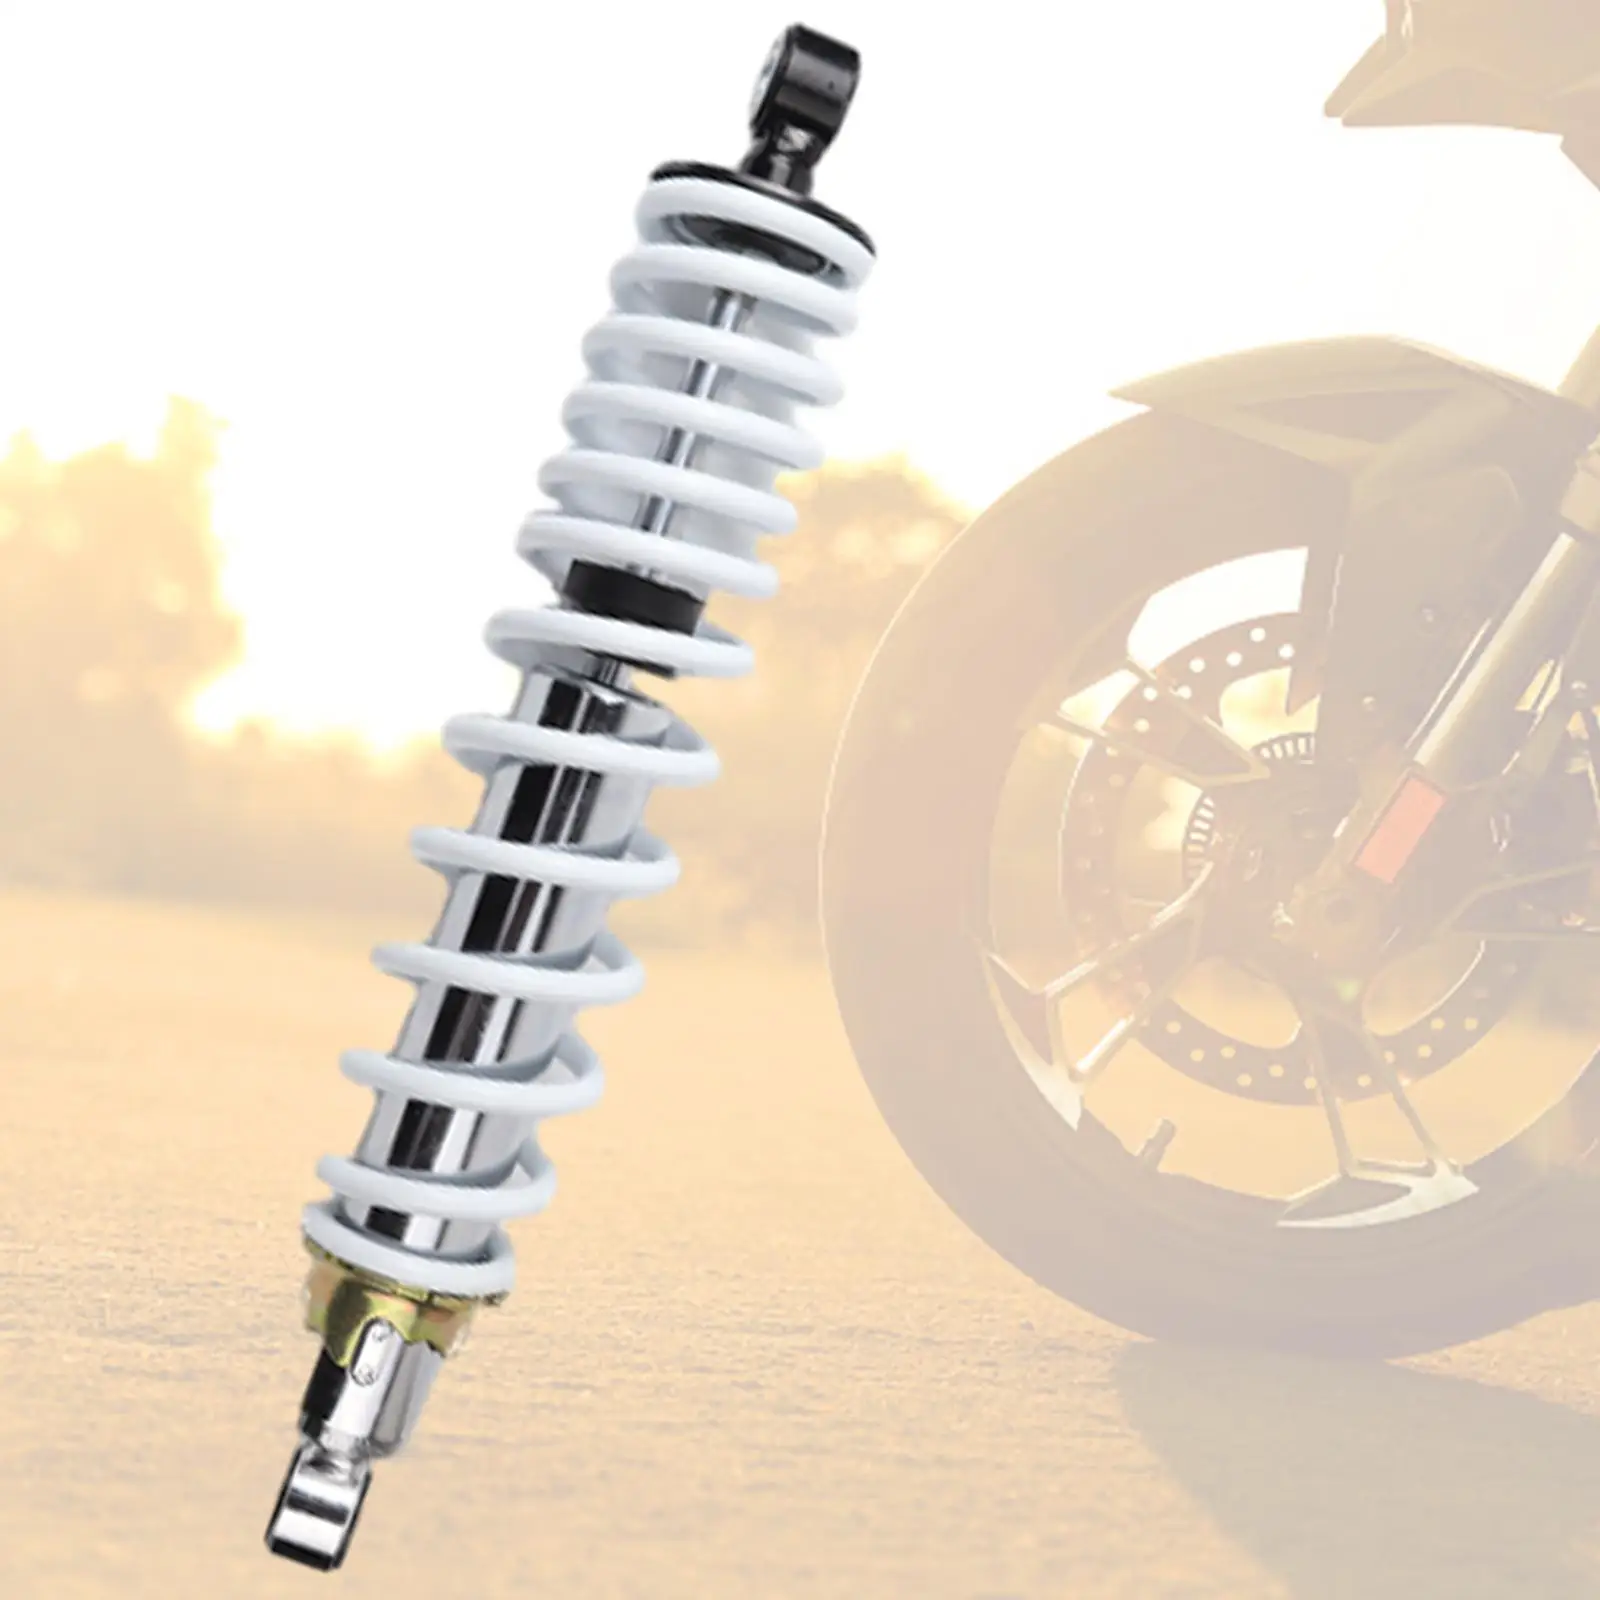 Generic Motorcycle Shock Absorber Damping 260mm for Easy Install